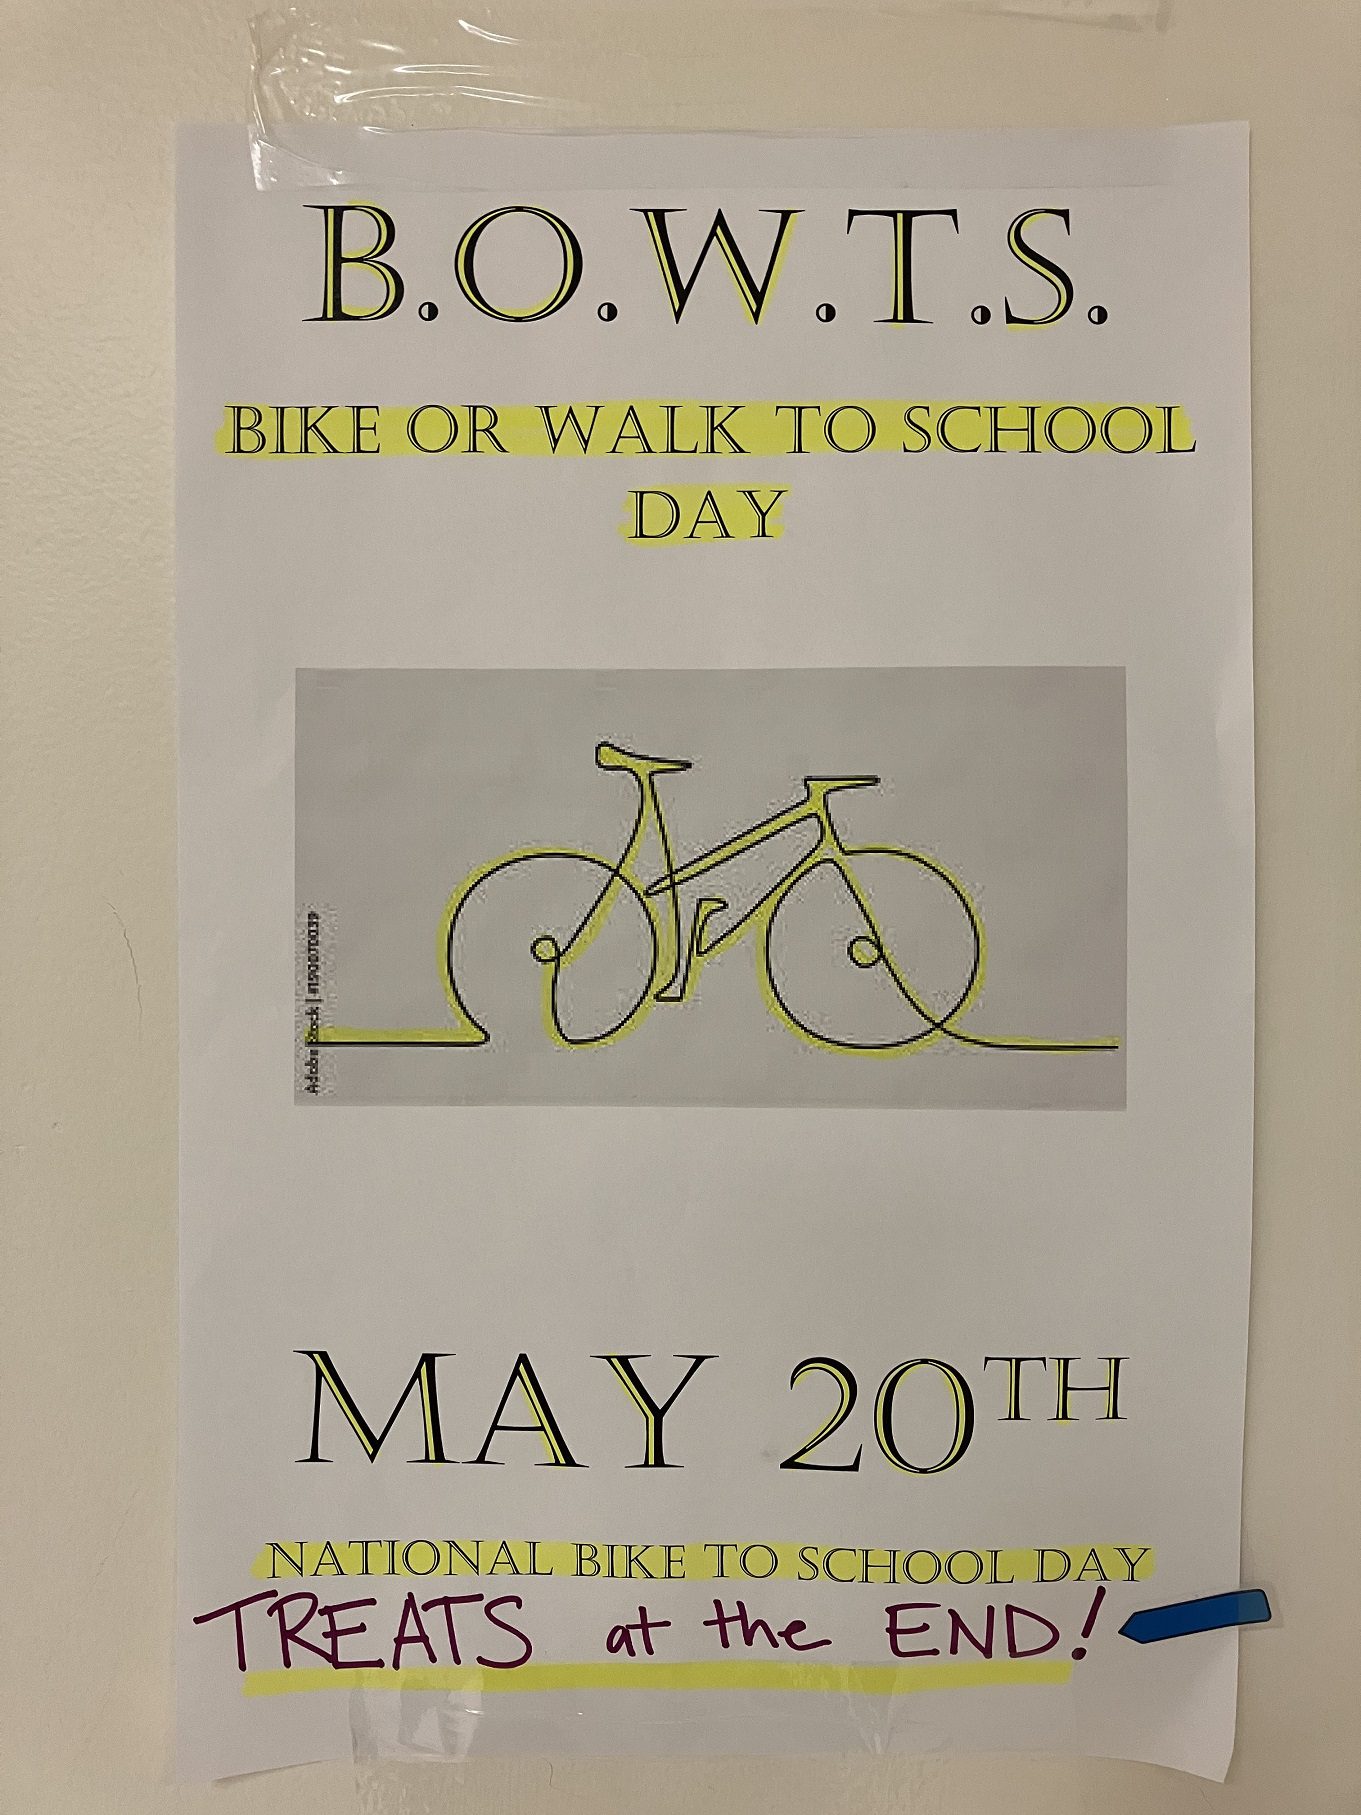 Student volunteers made flyers and posted them around their school to build interest in Bike Everywhere Day 2022.